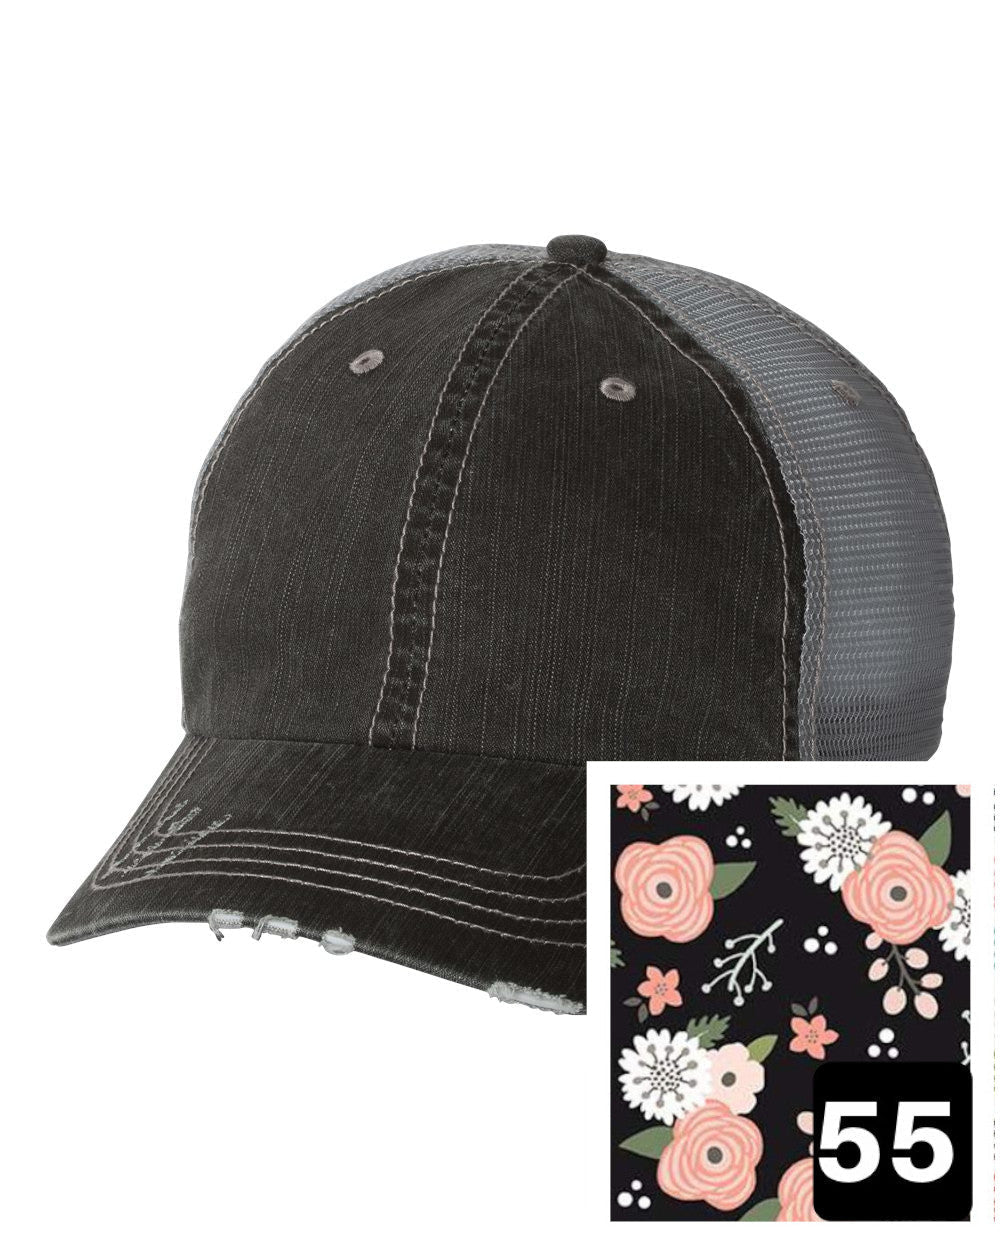 gray distressed trucker hat with petite floral on navy fabric state of North Carolina